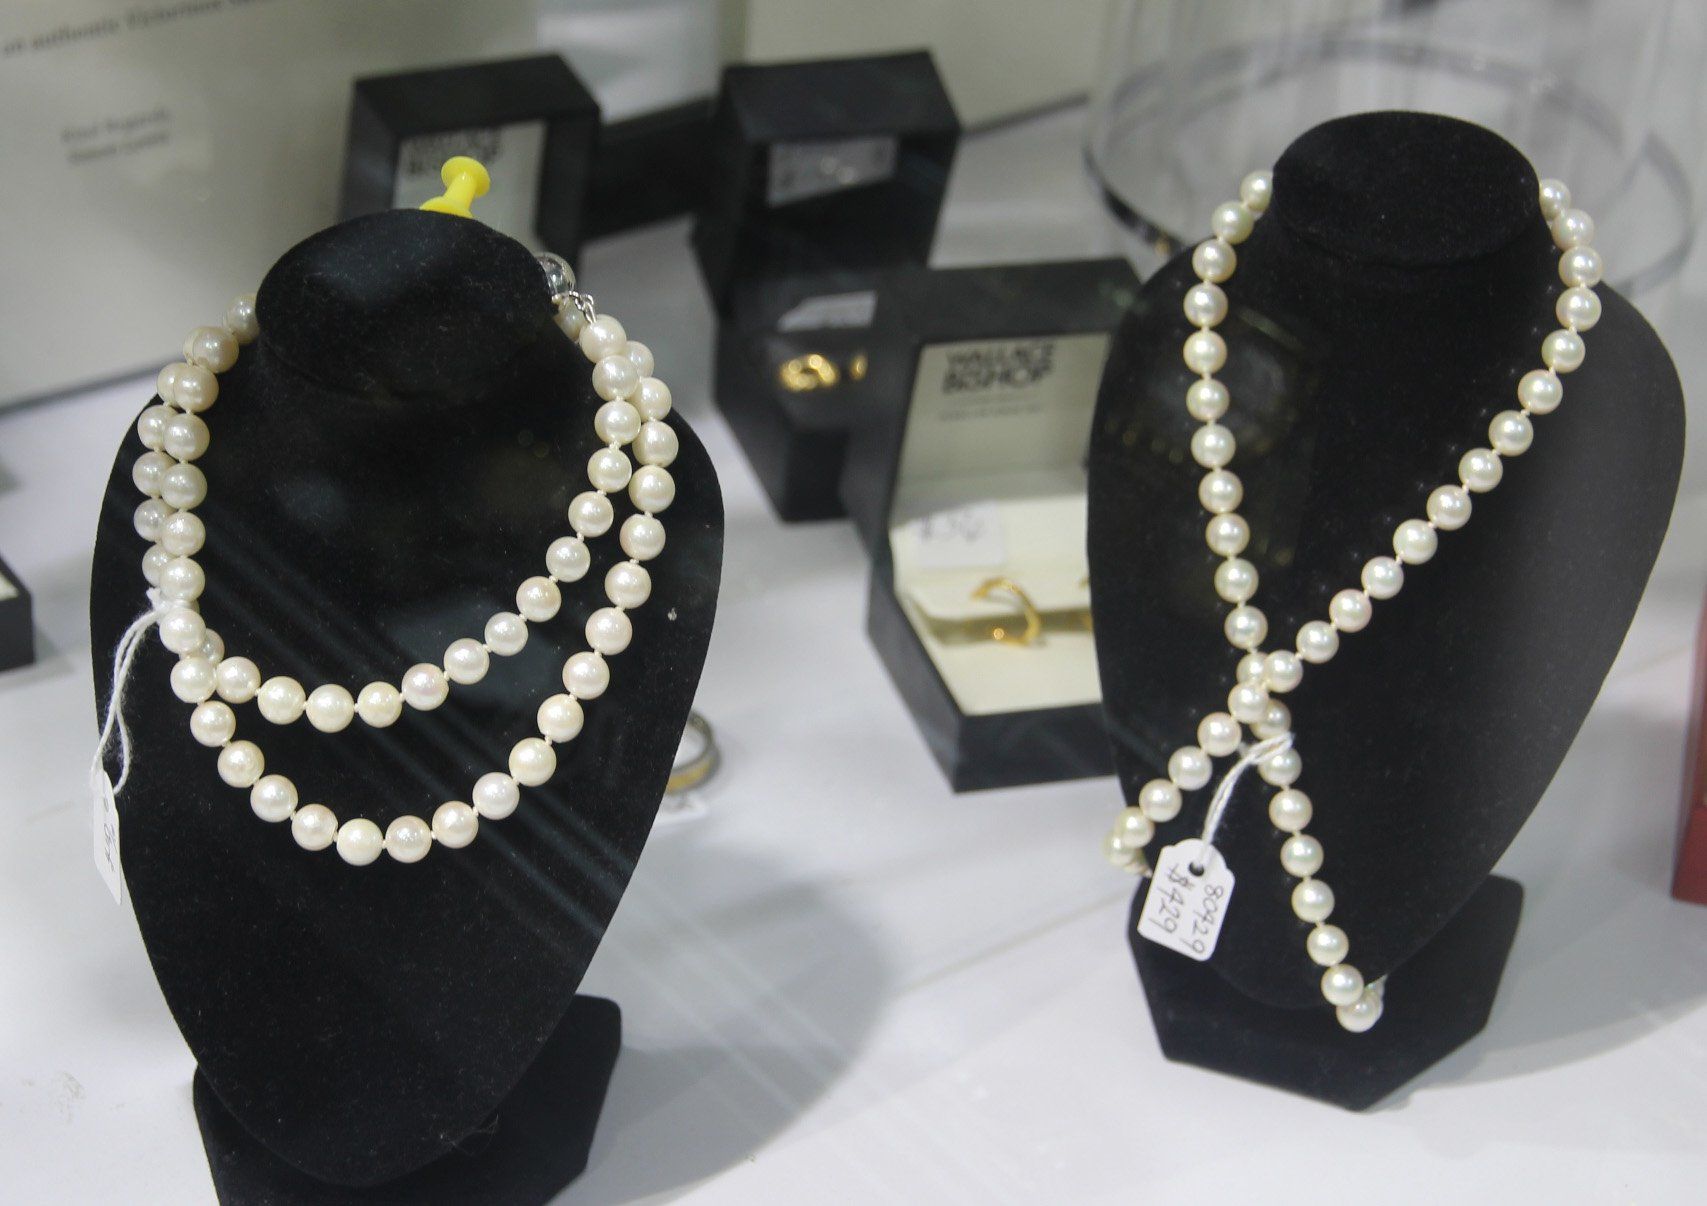 Pearl Necklaces on Display  — Pawnbrokers & Cash Loans in Coffs Harbour